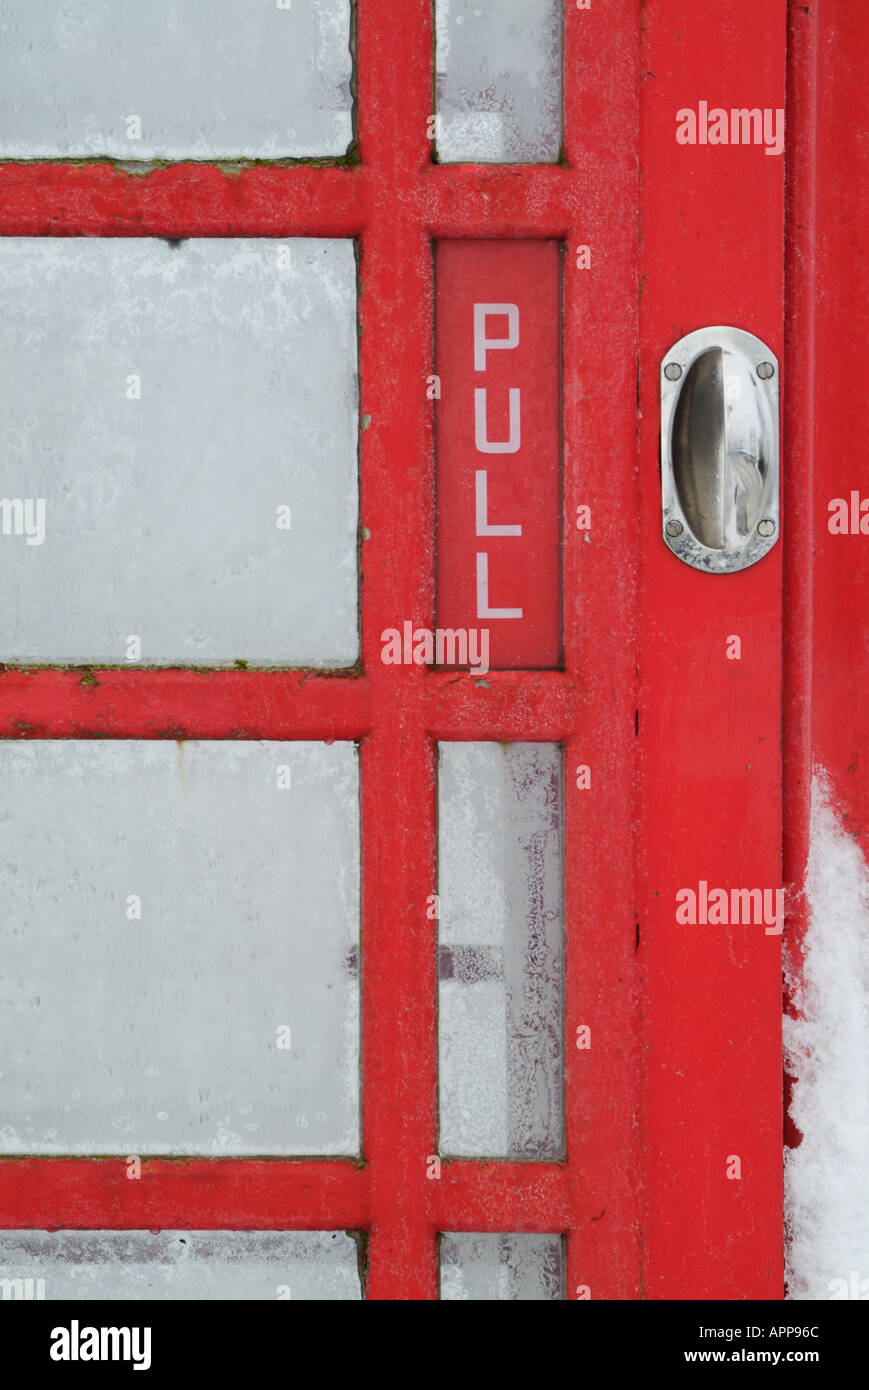 Snow covered door and glass panes of traditional red telephone box in derbyshire peak district England UK GB EU Europe Stock Photo